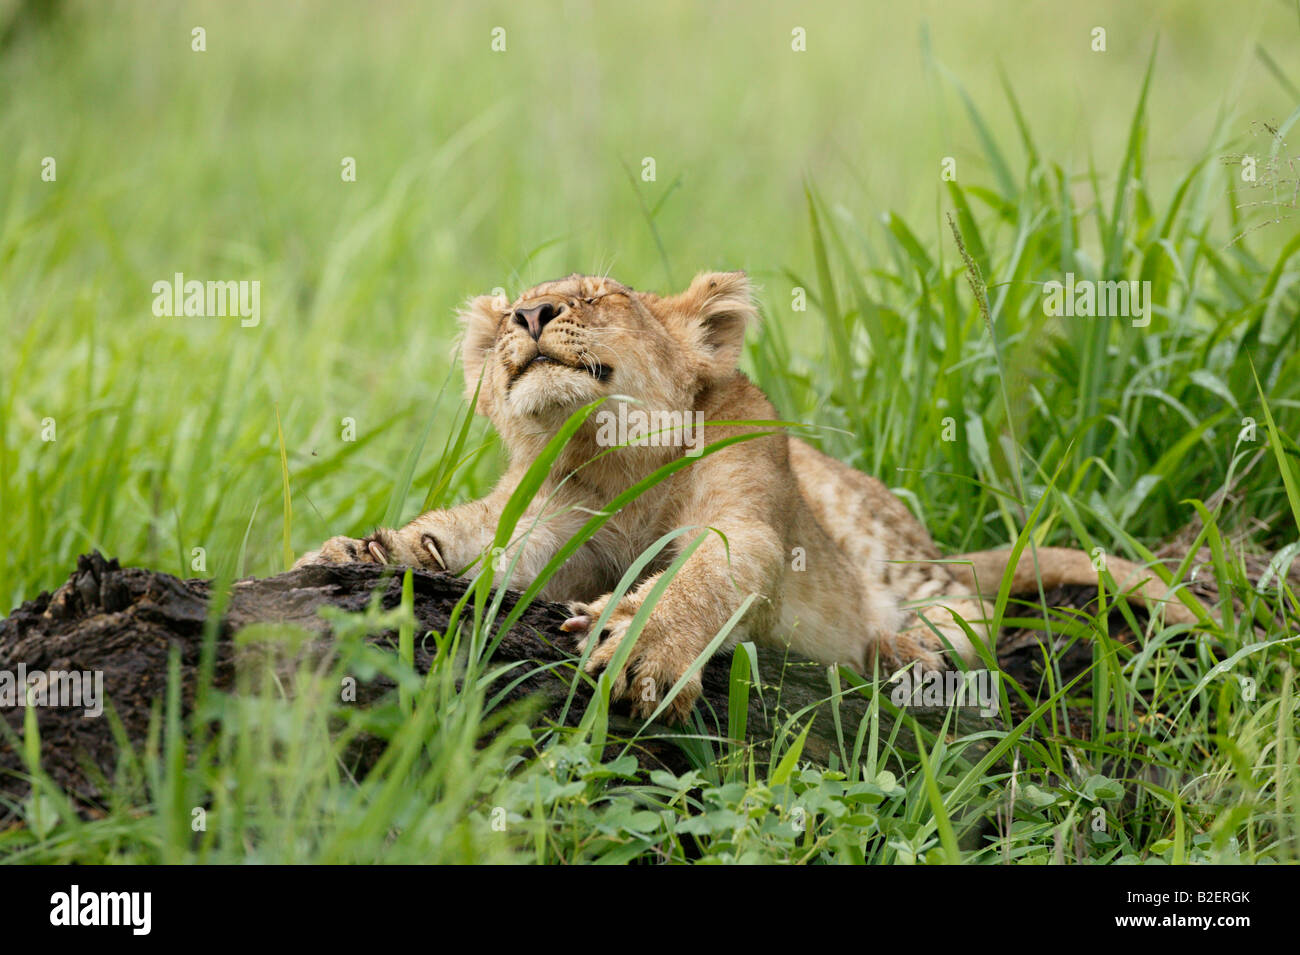 Lion cub stretching and sharpening its claws on a log Stock Photo